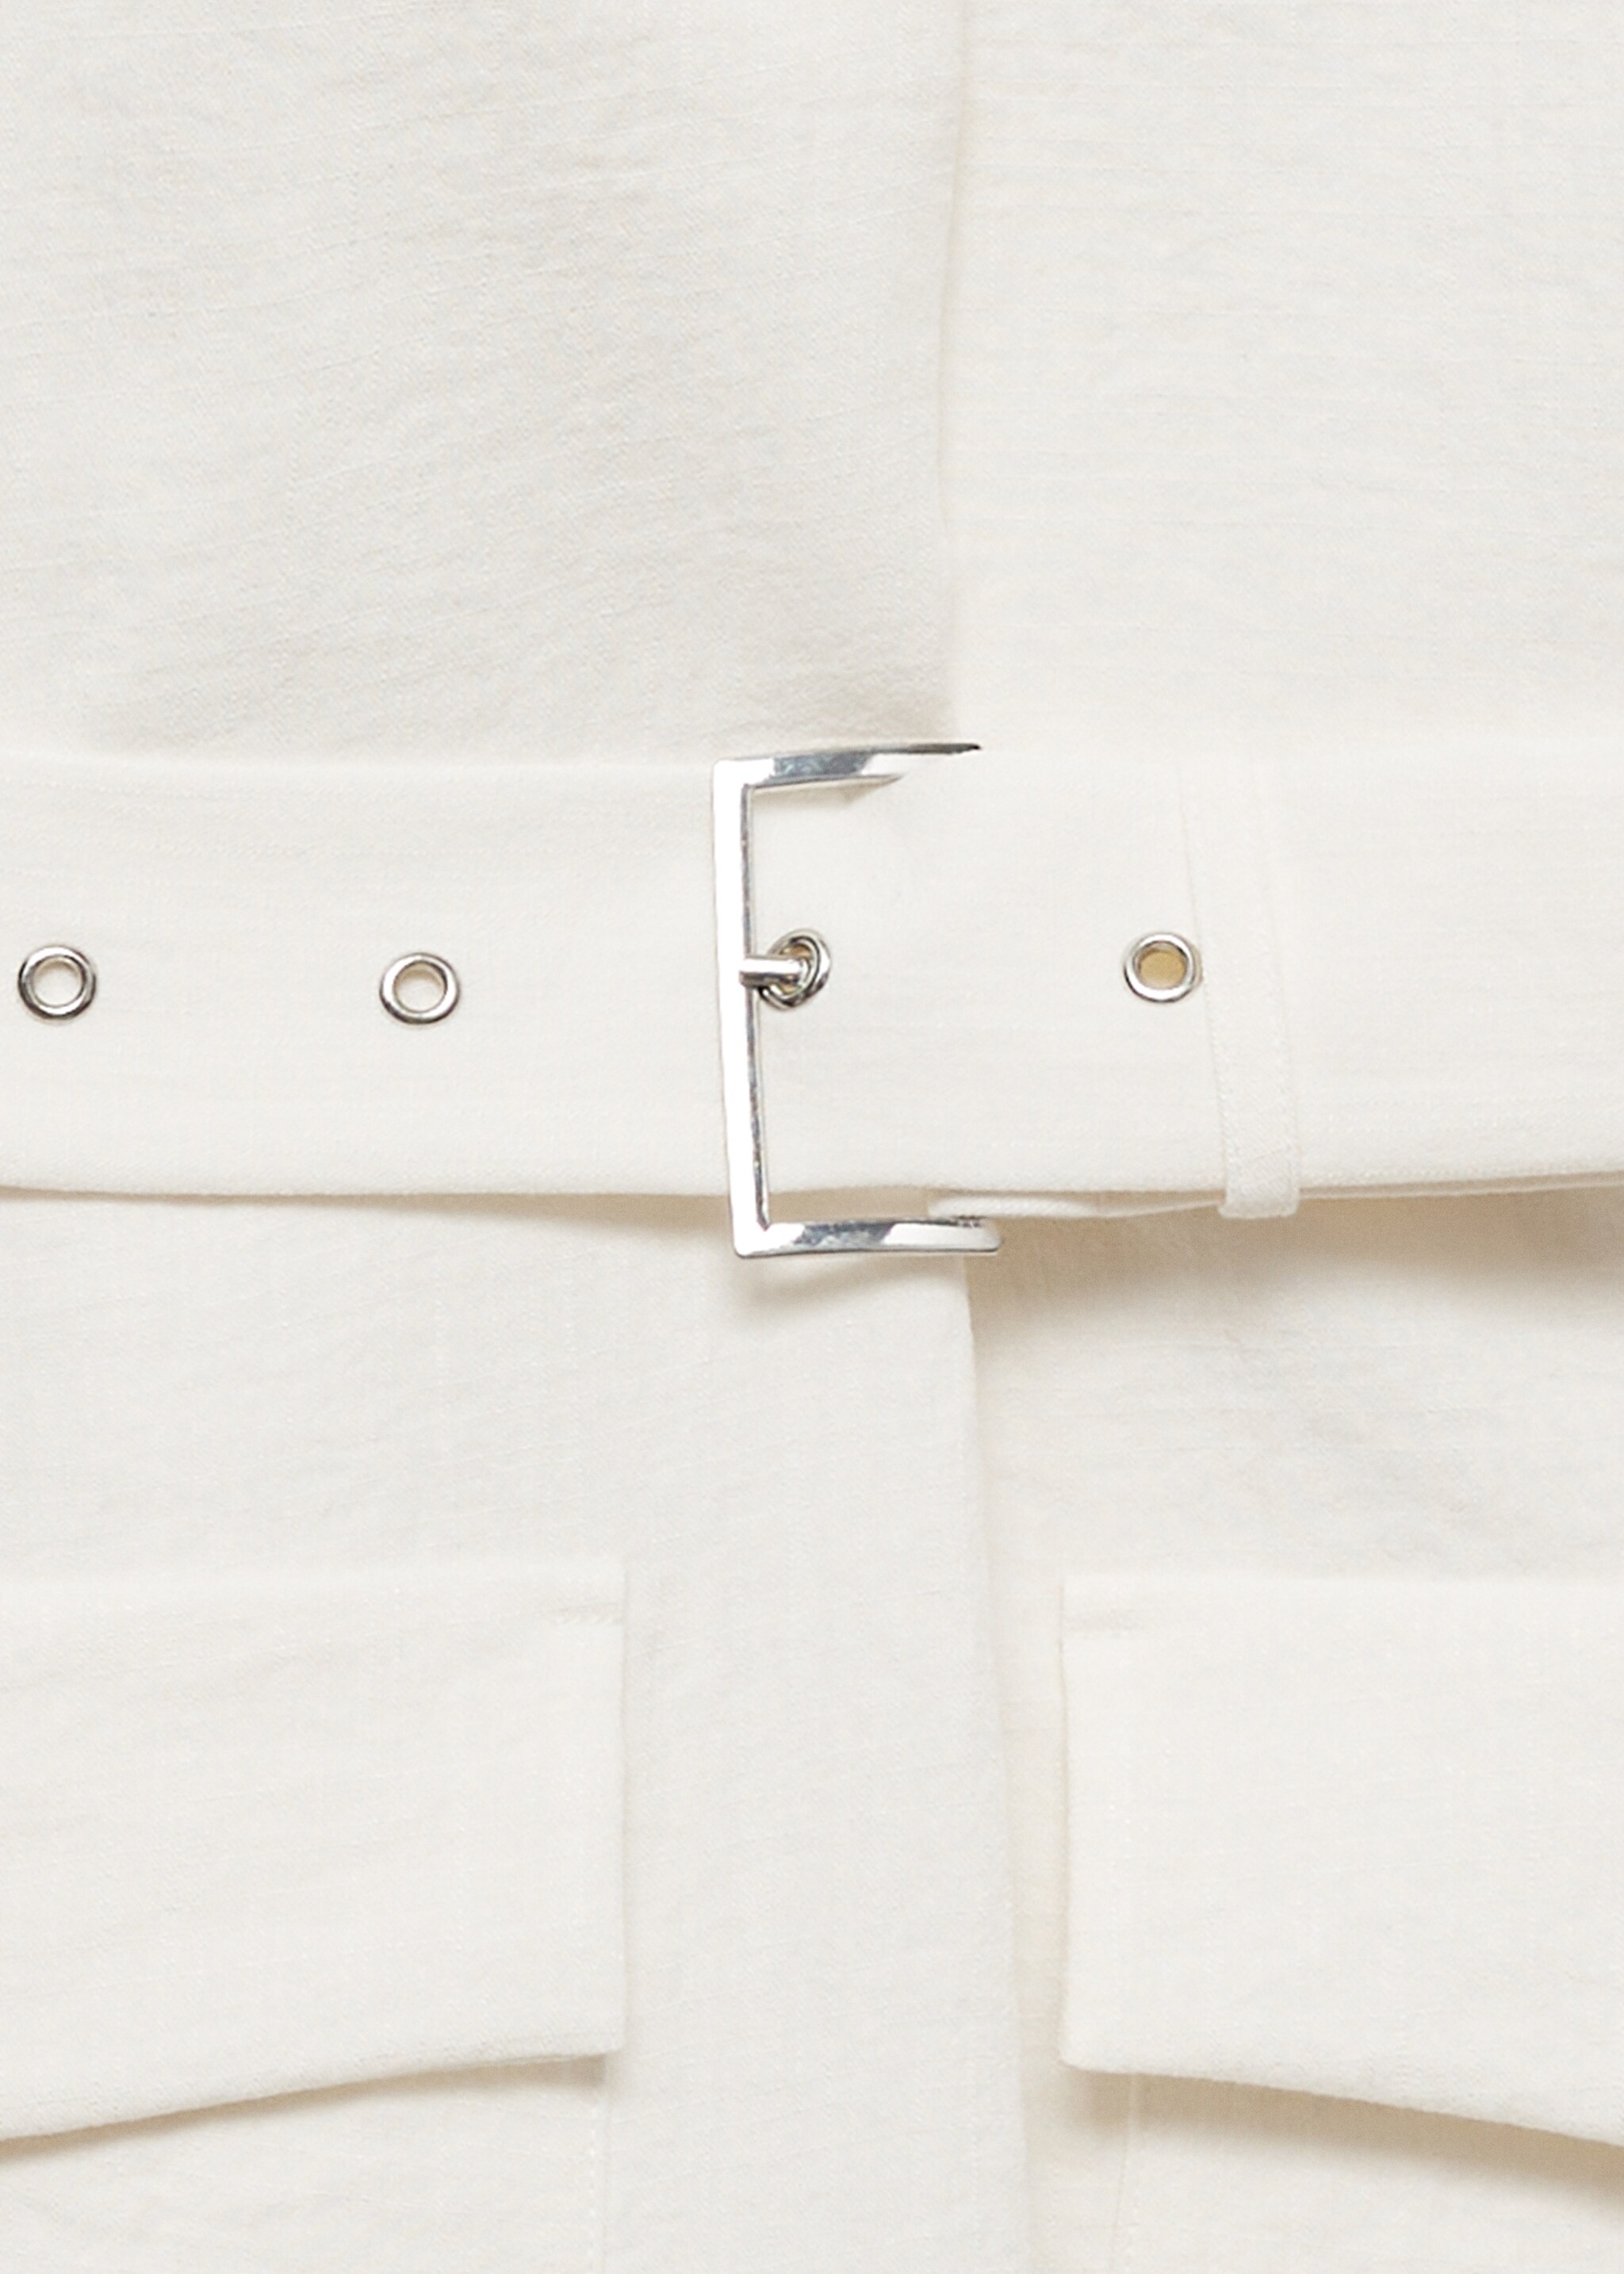 Dress with pockets and belt - Details of the article 8